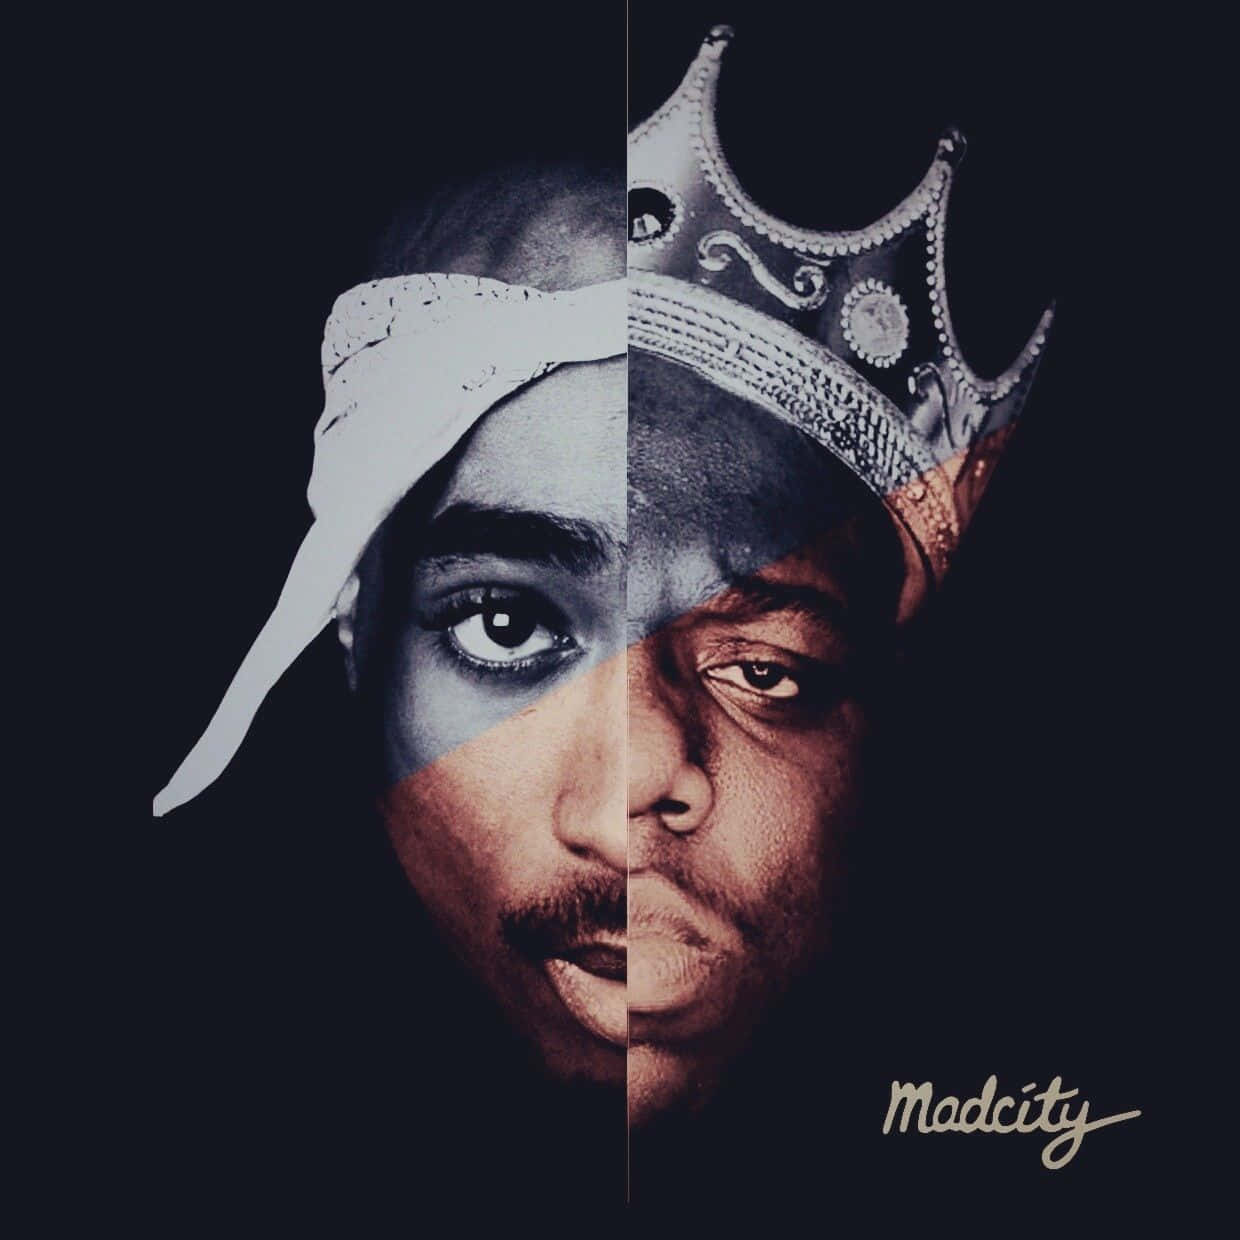 A musical moment of unity - 2pac with Biggie Wallpaper